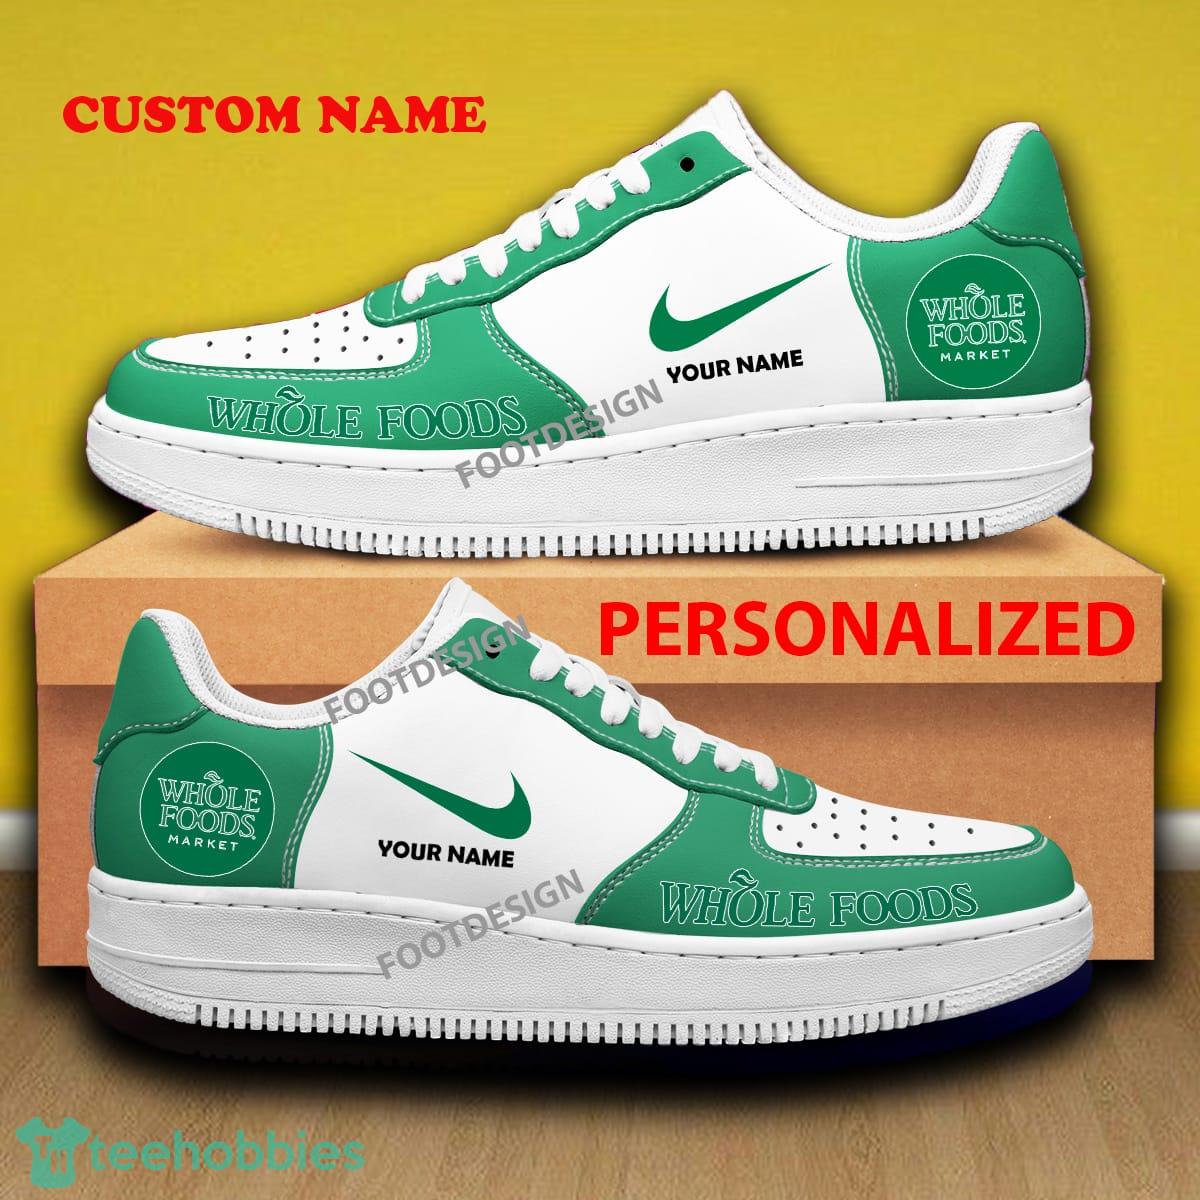 Custom Name Whole Foods Market Air Force 1 Sneakers Brand All Over Print Gift - Custom Name Whole Foods Market Air Force 1 Sneakers Brand All Over Print Gift